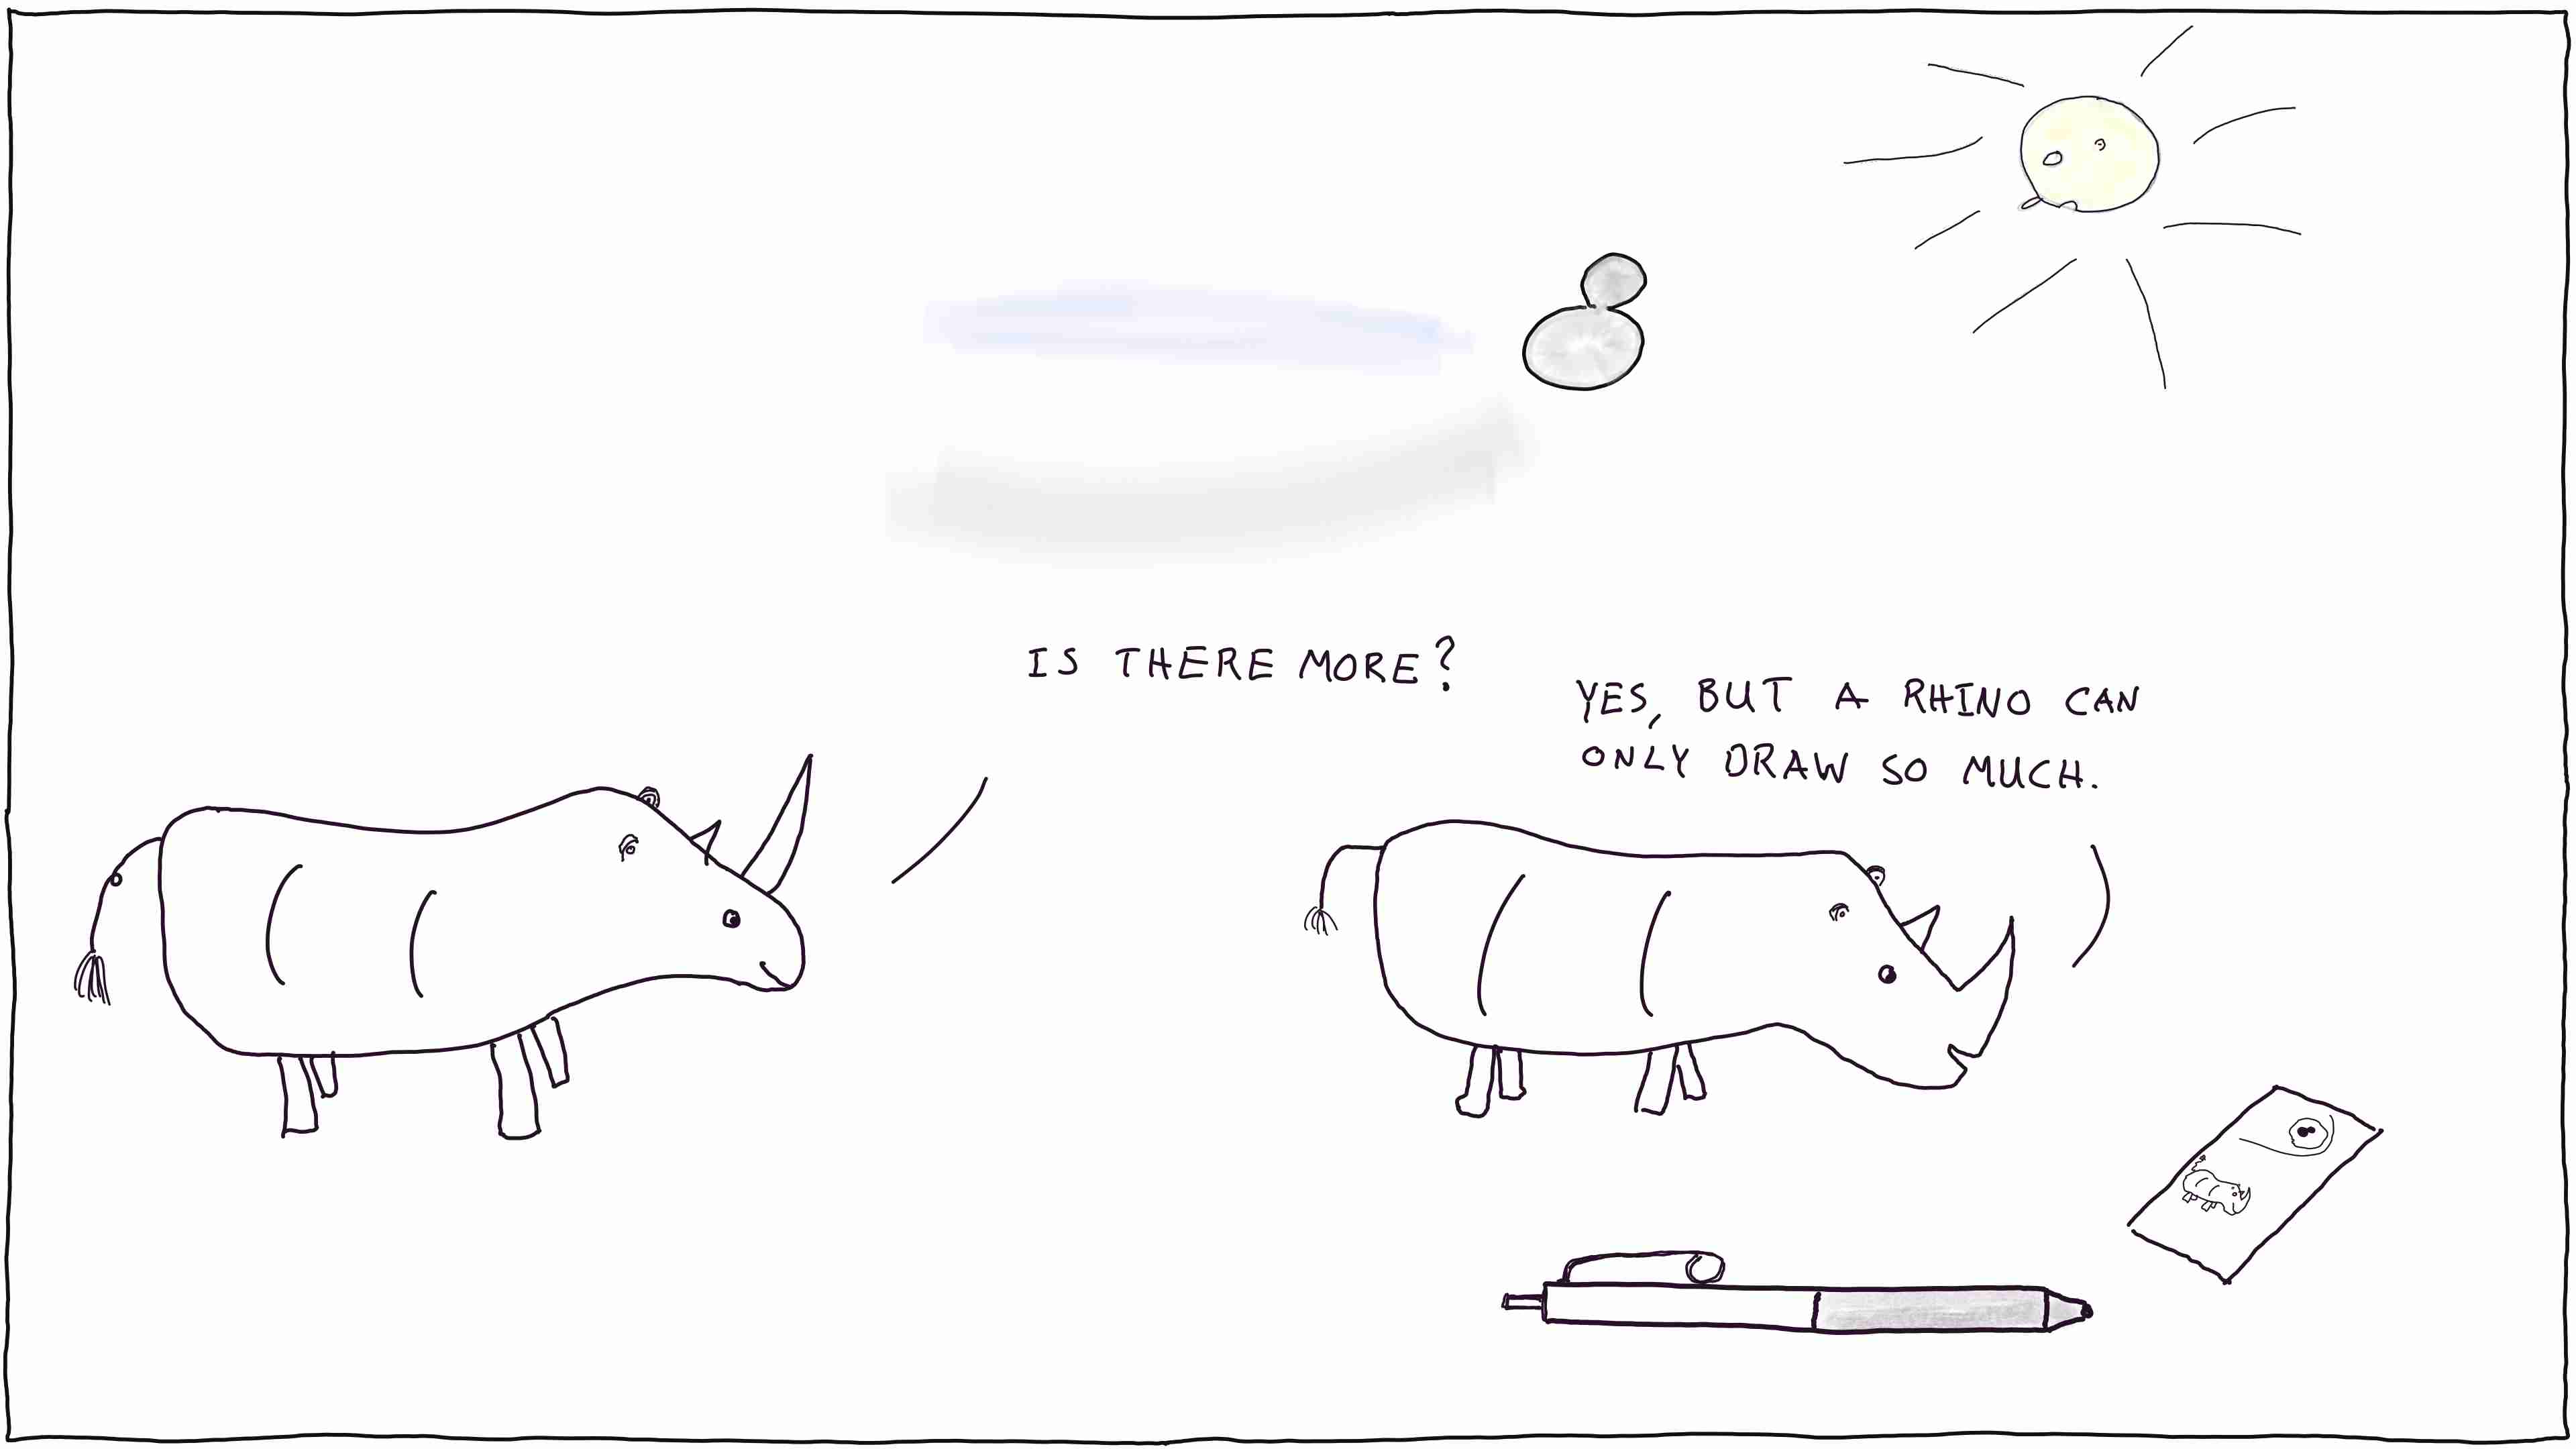 A rhino can only draw so much